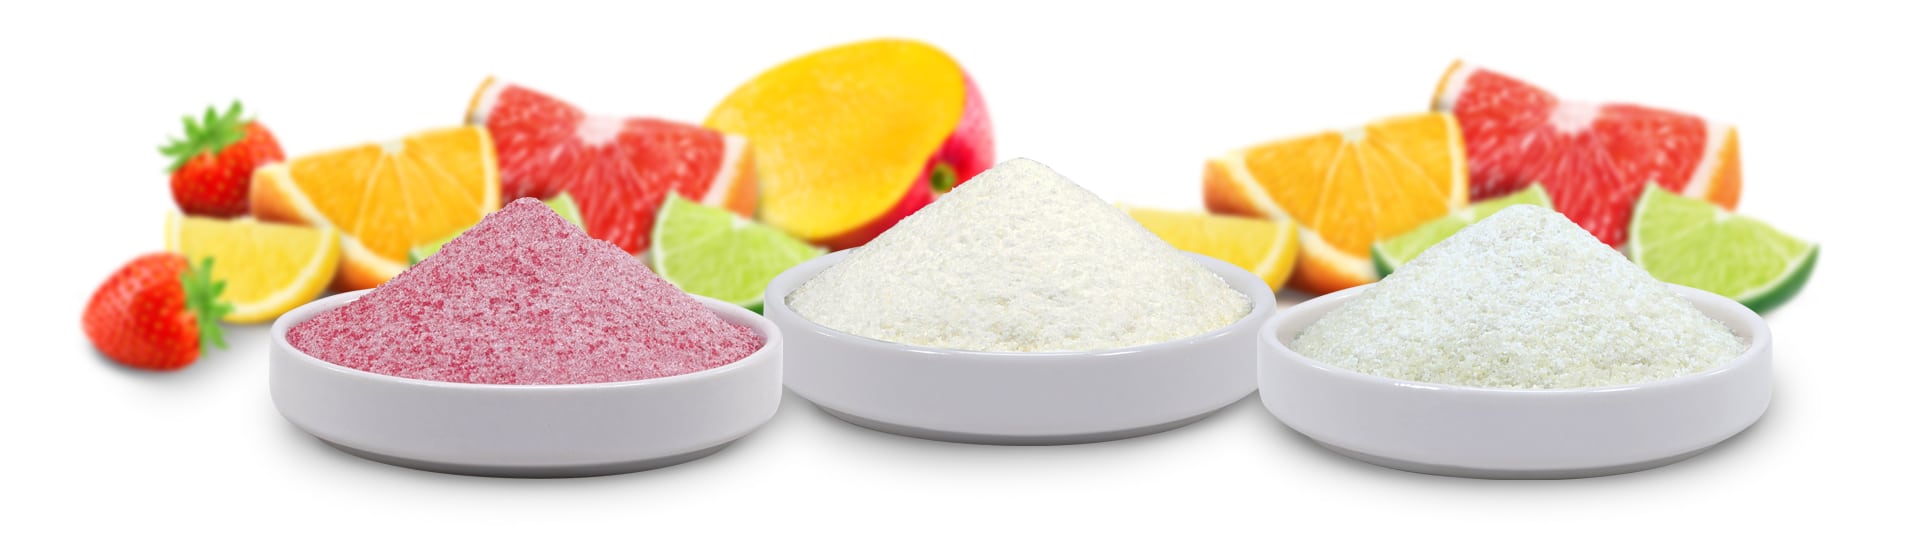 Variety of Fruit with Fruit Powders